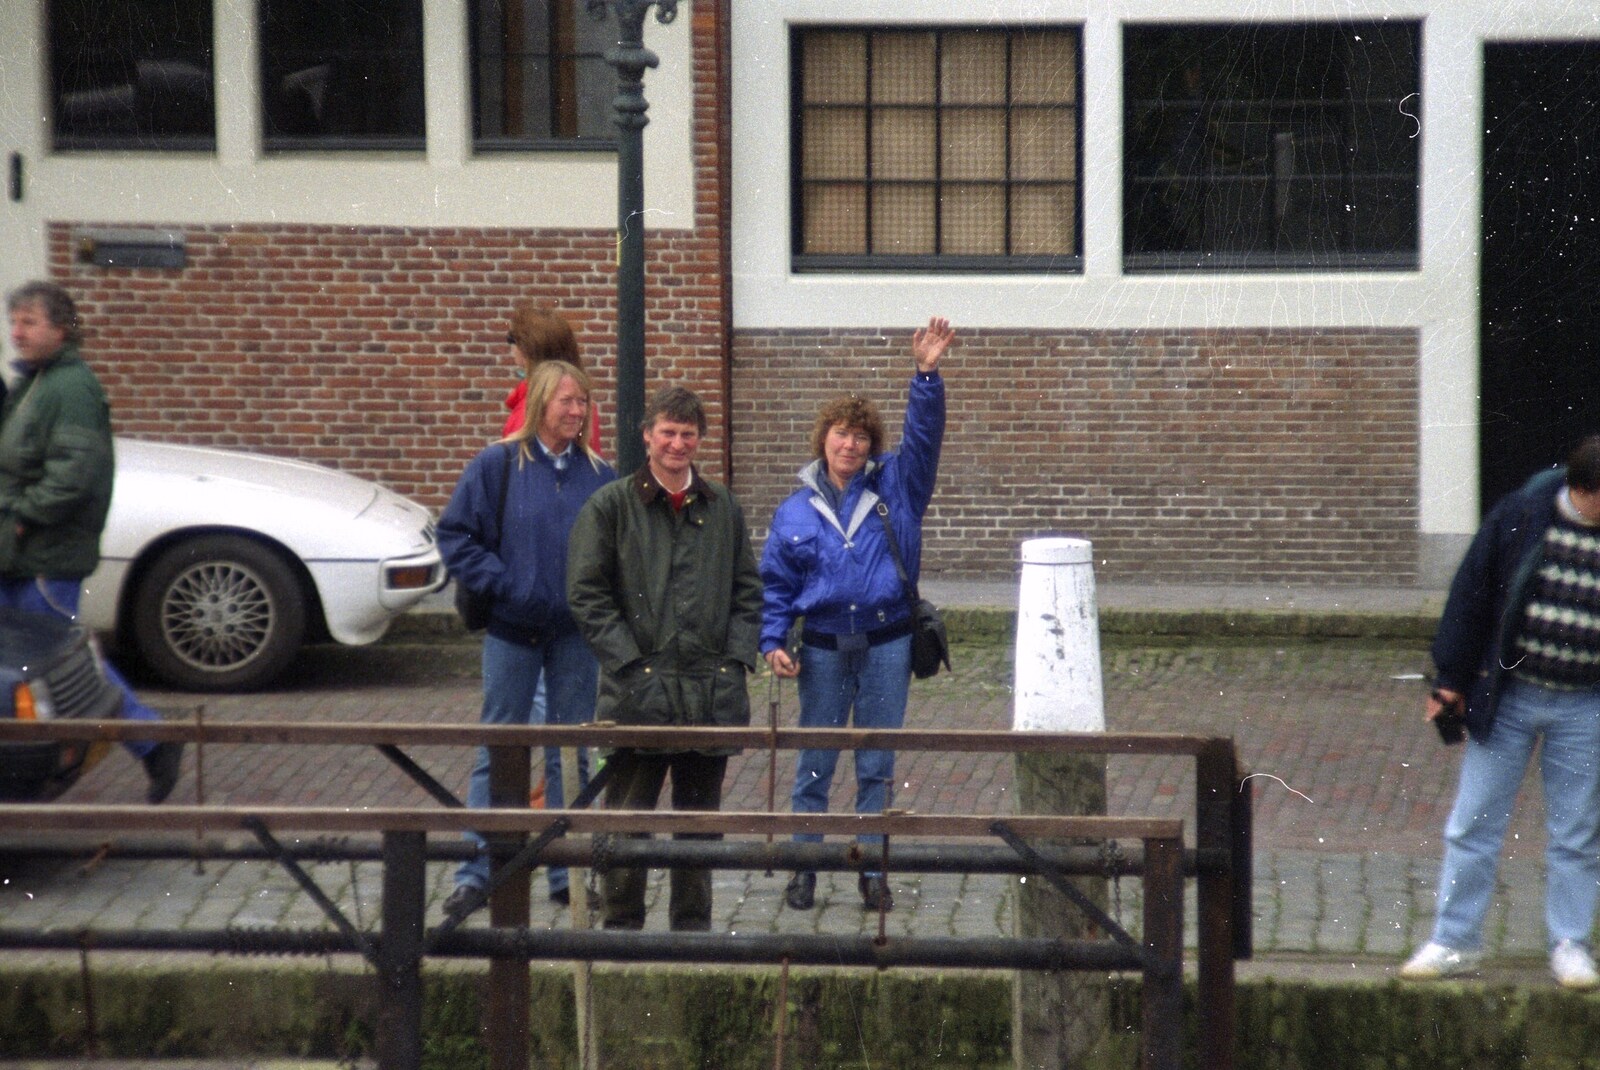 Out and About in Amsterdam, Hoorne, Vollendam and Edam, The Netherlands - 26th March 1992: Brenda waves